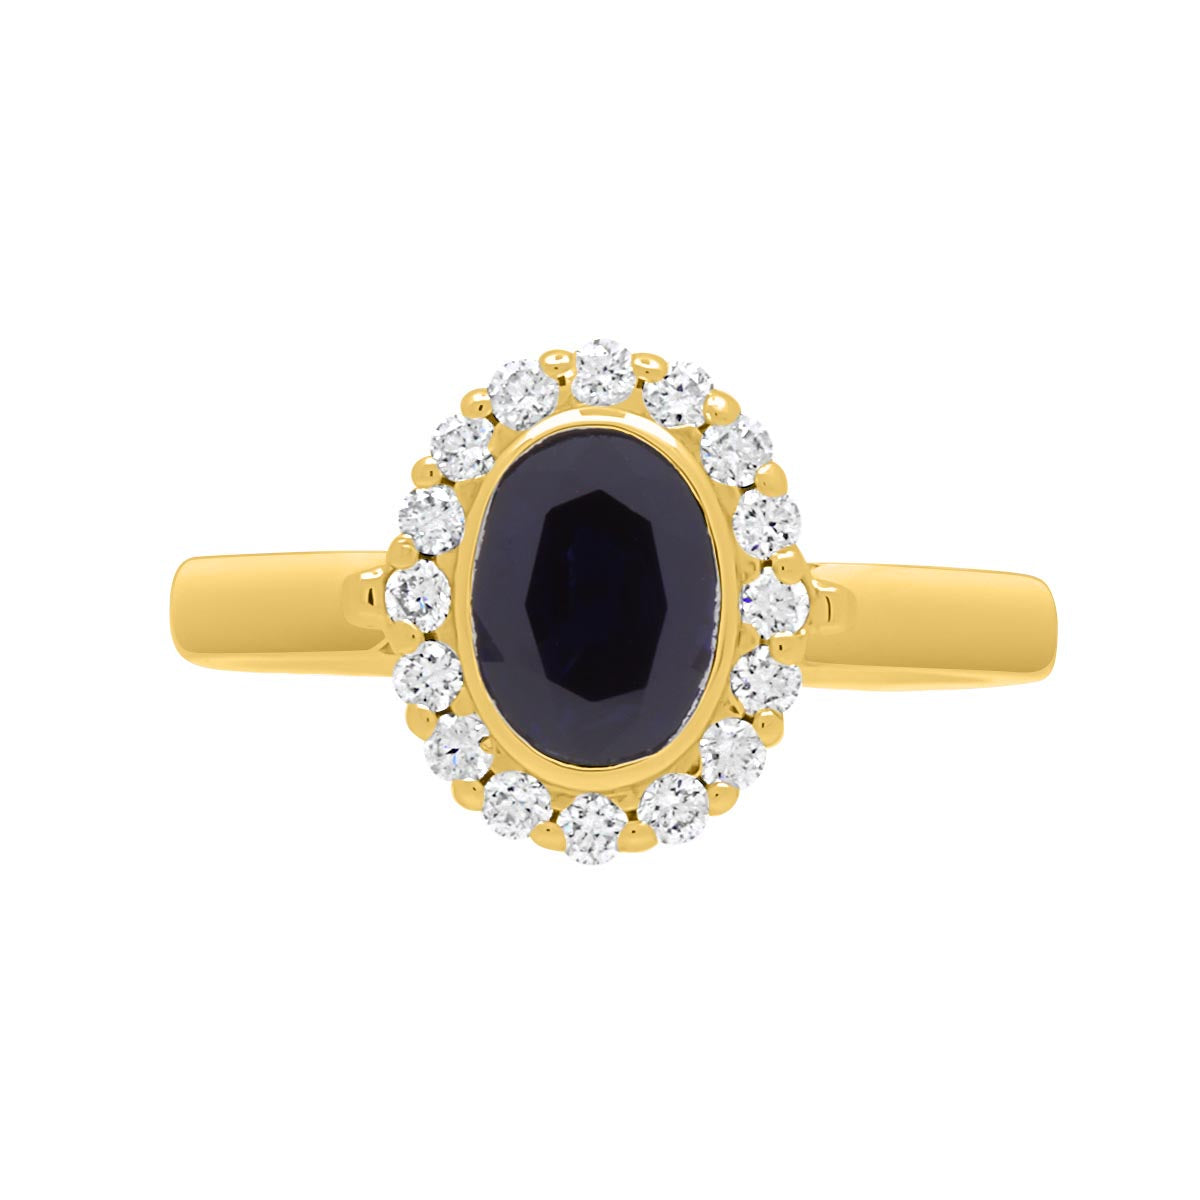 Sapphire Bezel Engagement Ring in yellow gold